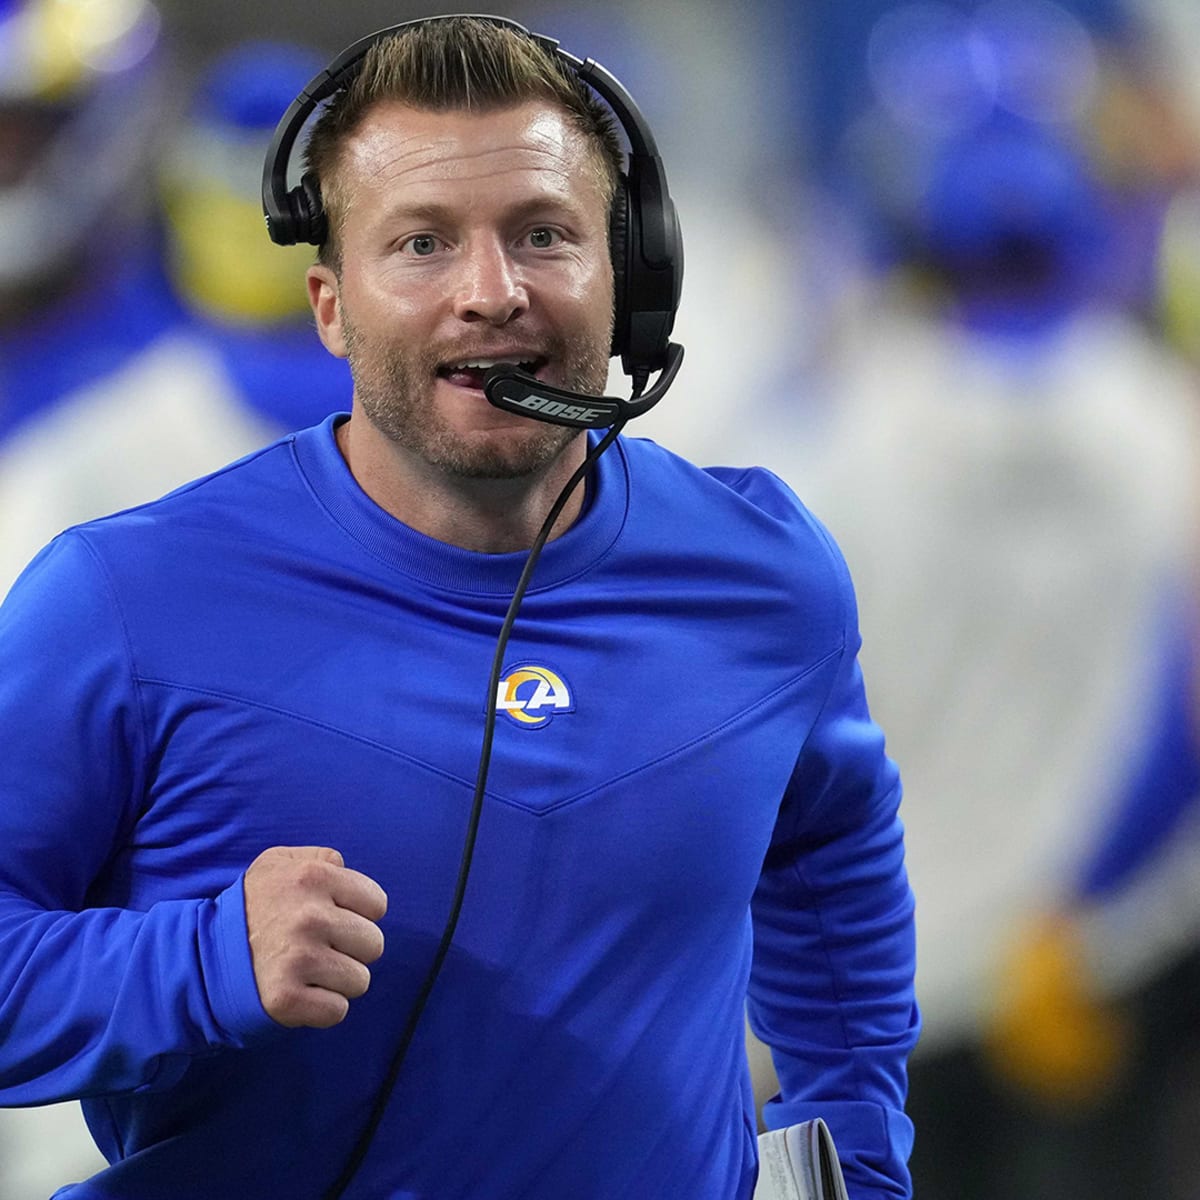 Welcome to the Sean McVay Moment - Inside the pressures that